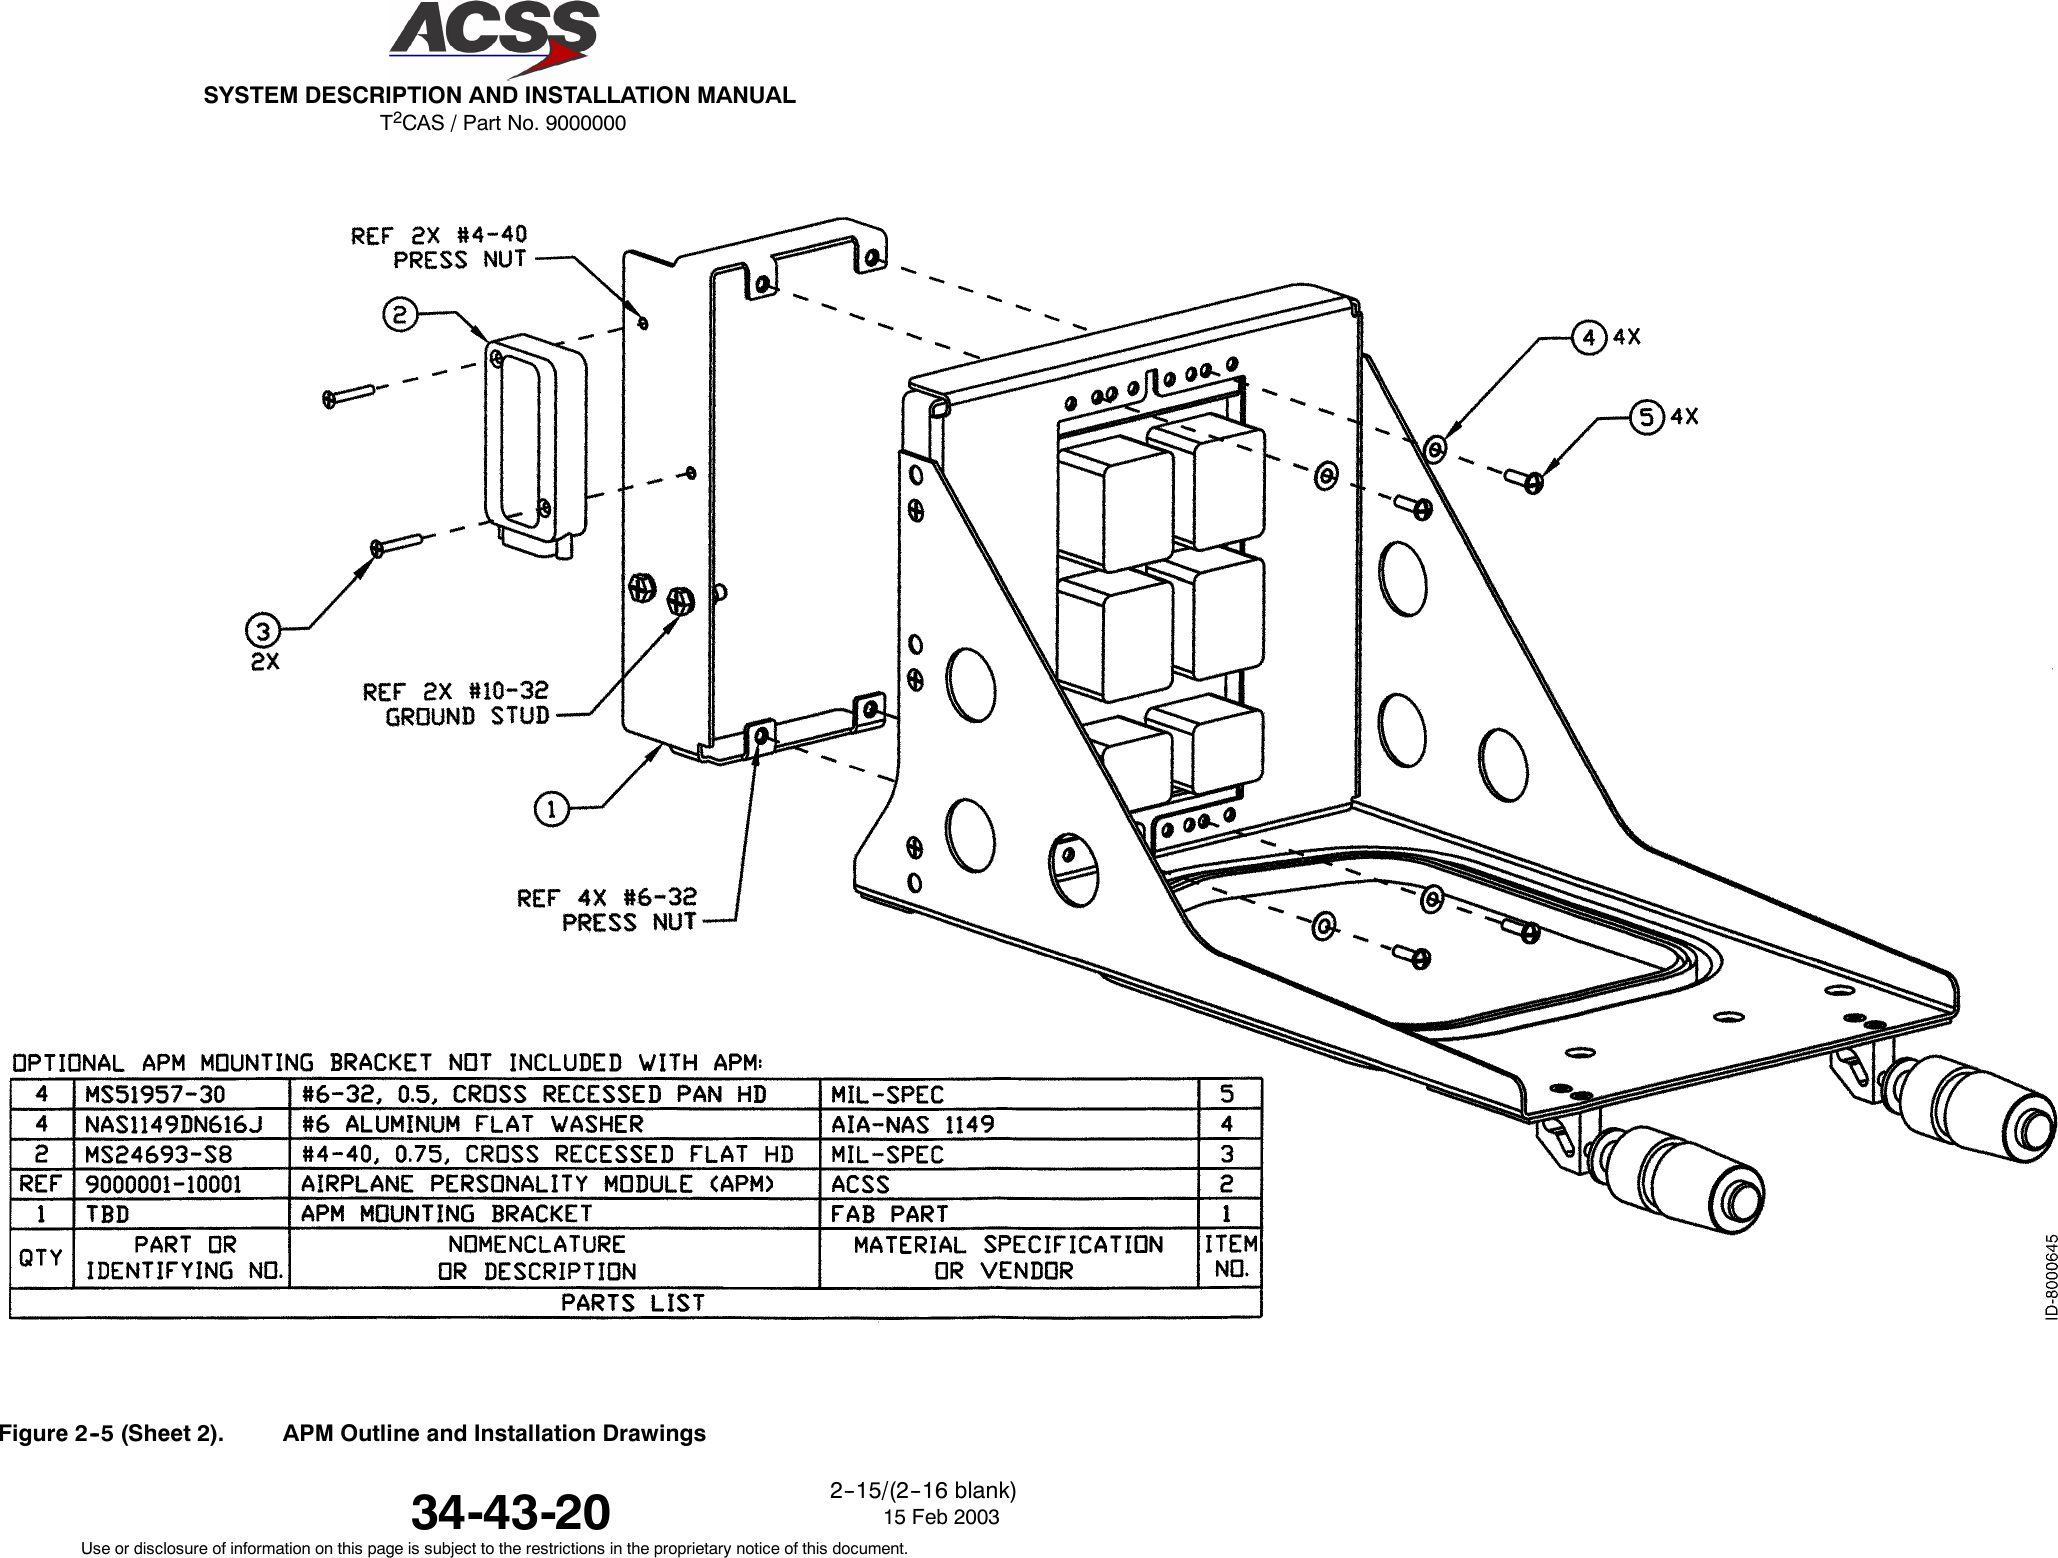 T2CAS / Part No. 9000000SYSTEM DESCRIPTION AND INSTALLATION MANUAL34-43-20 15 Feb 2003Use or disclosure of information on this page is subject to the restrictions in the proprietary notice of this document.2--15/(2--16 blank)Figure 2--5 (Sheet 2). APM Outline and Installation Drawings